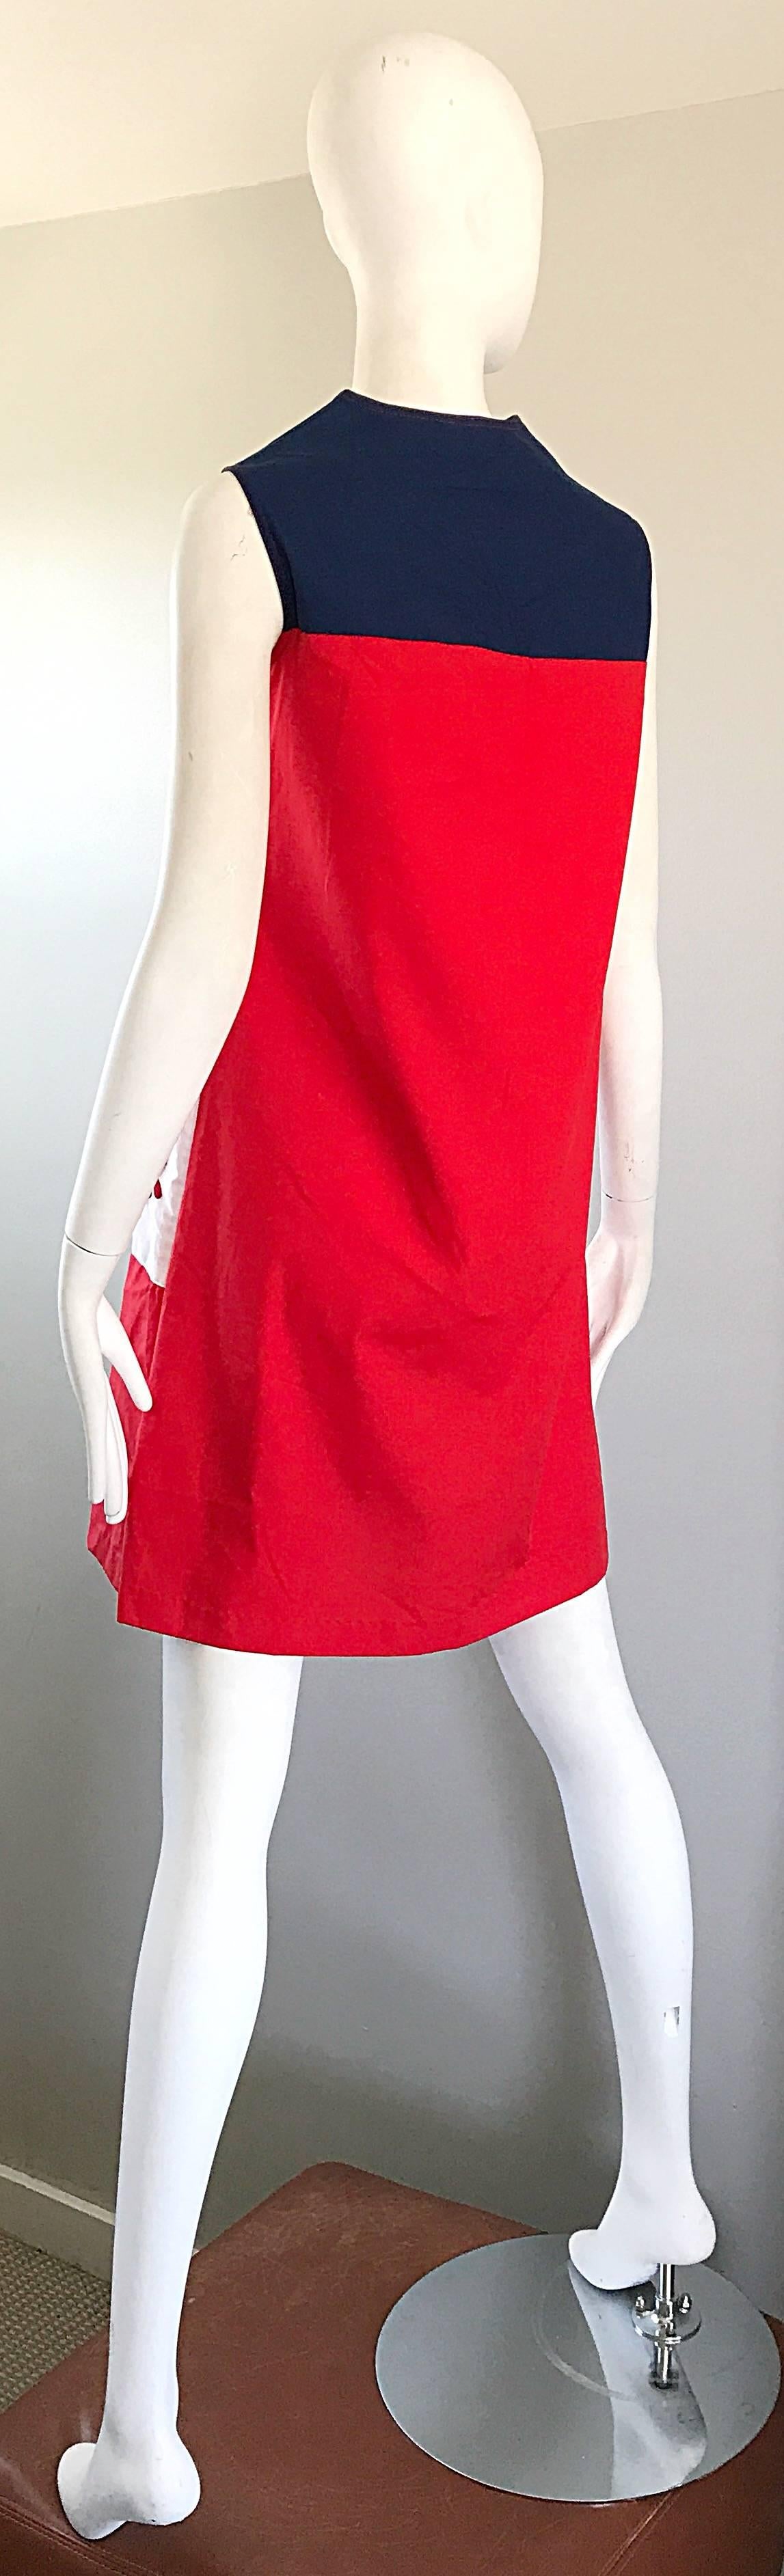 Chic 1960s Red, White and Navy Blue Nautical Sailor Vintage 60s A Line Dress  2